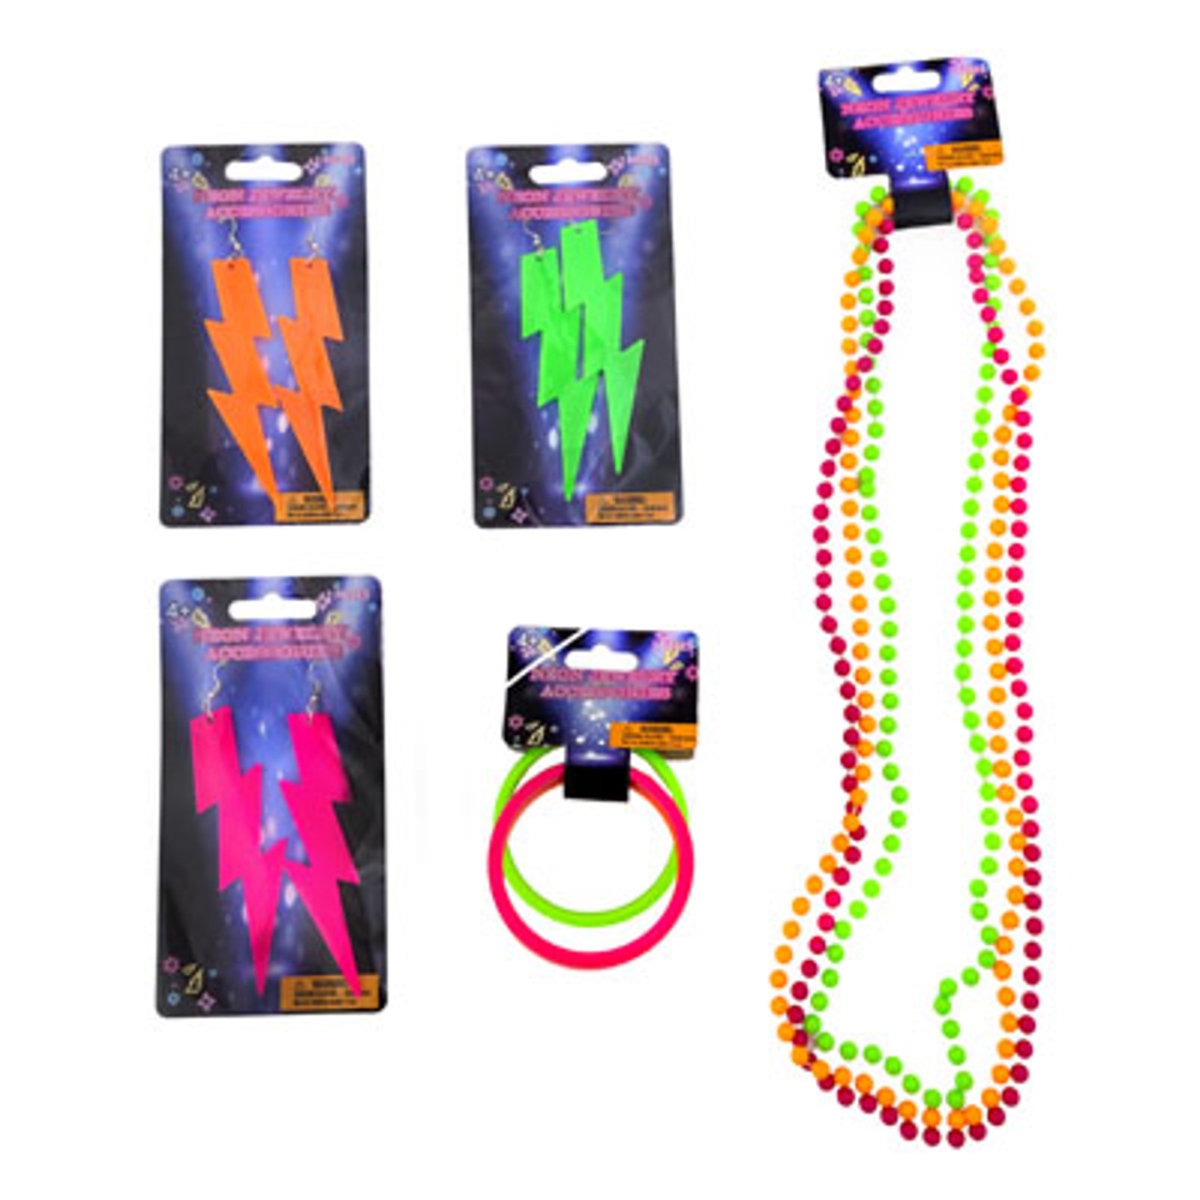 Regent Products G19206 Jewelry Accessories Neon Earring Bead Bracelet&#44; 3 Assorted Color - 3 Piece